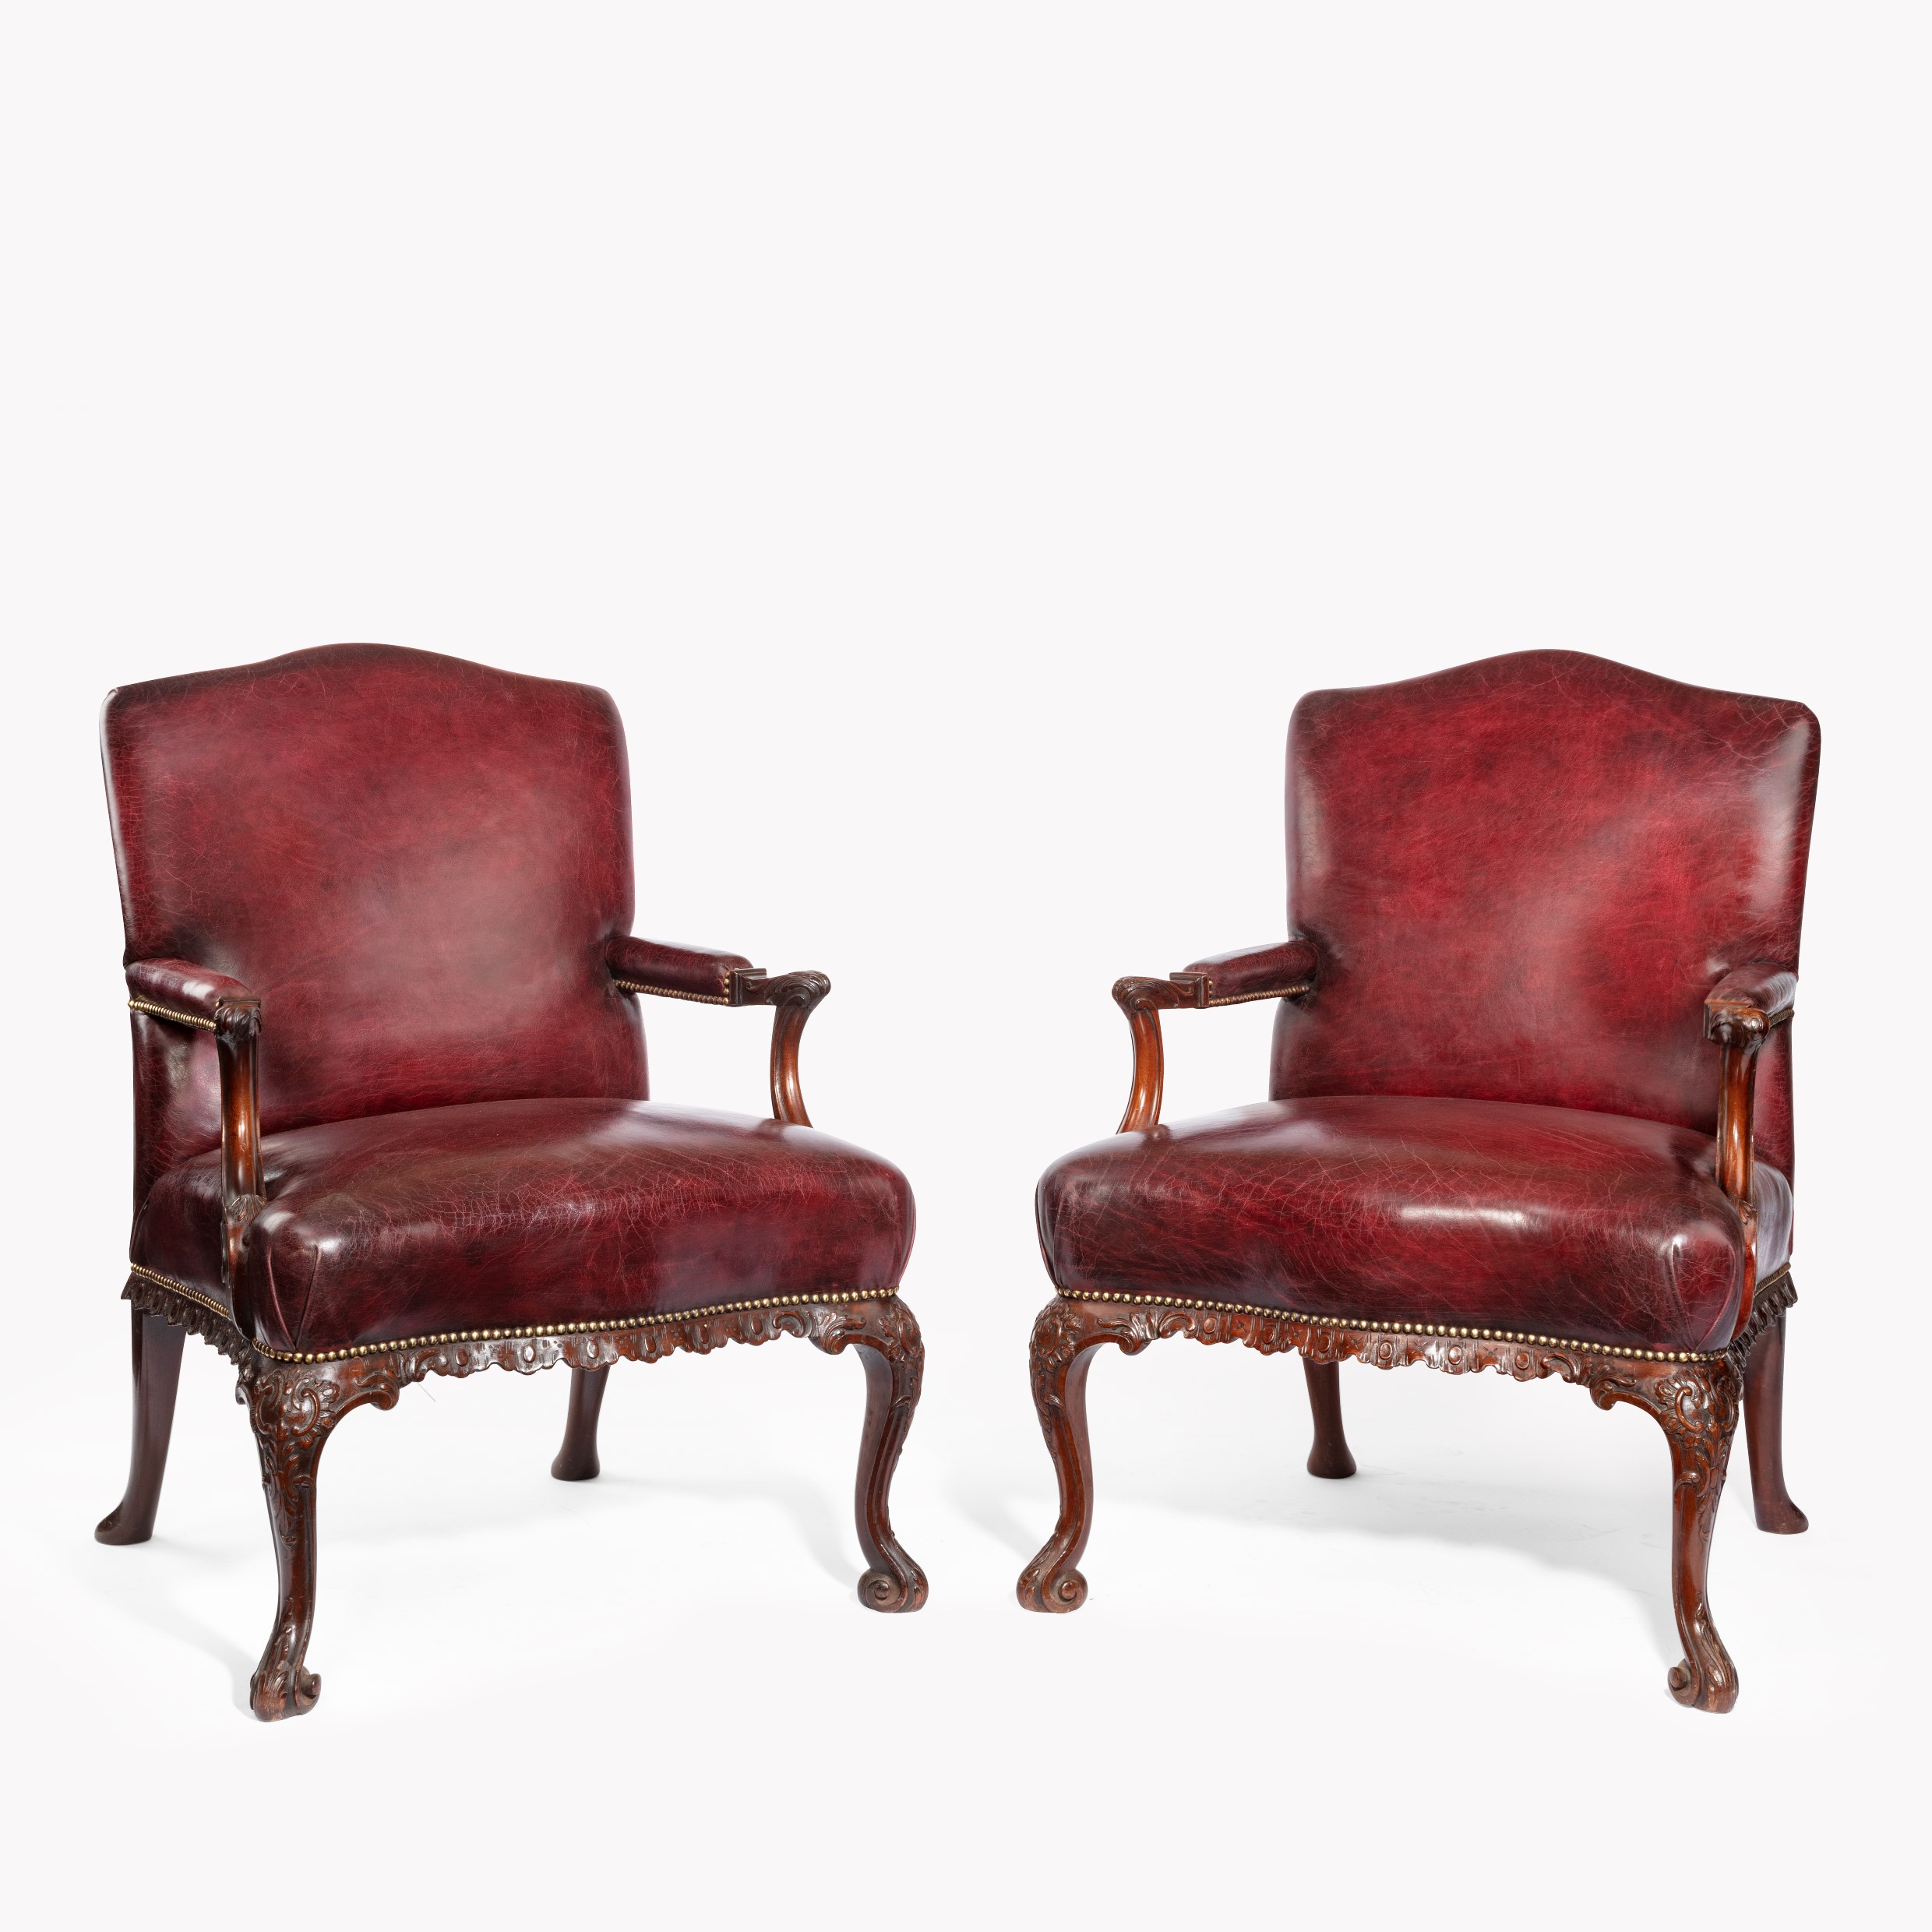 A pair late Victorian Mahogany open arm chairs in the Chippendale taste